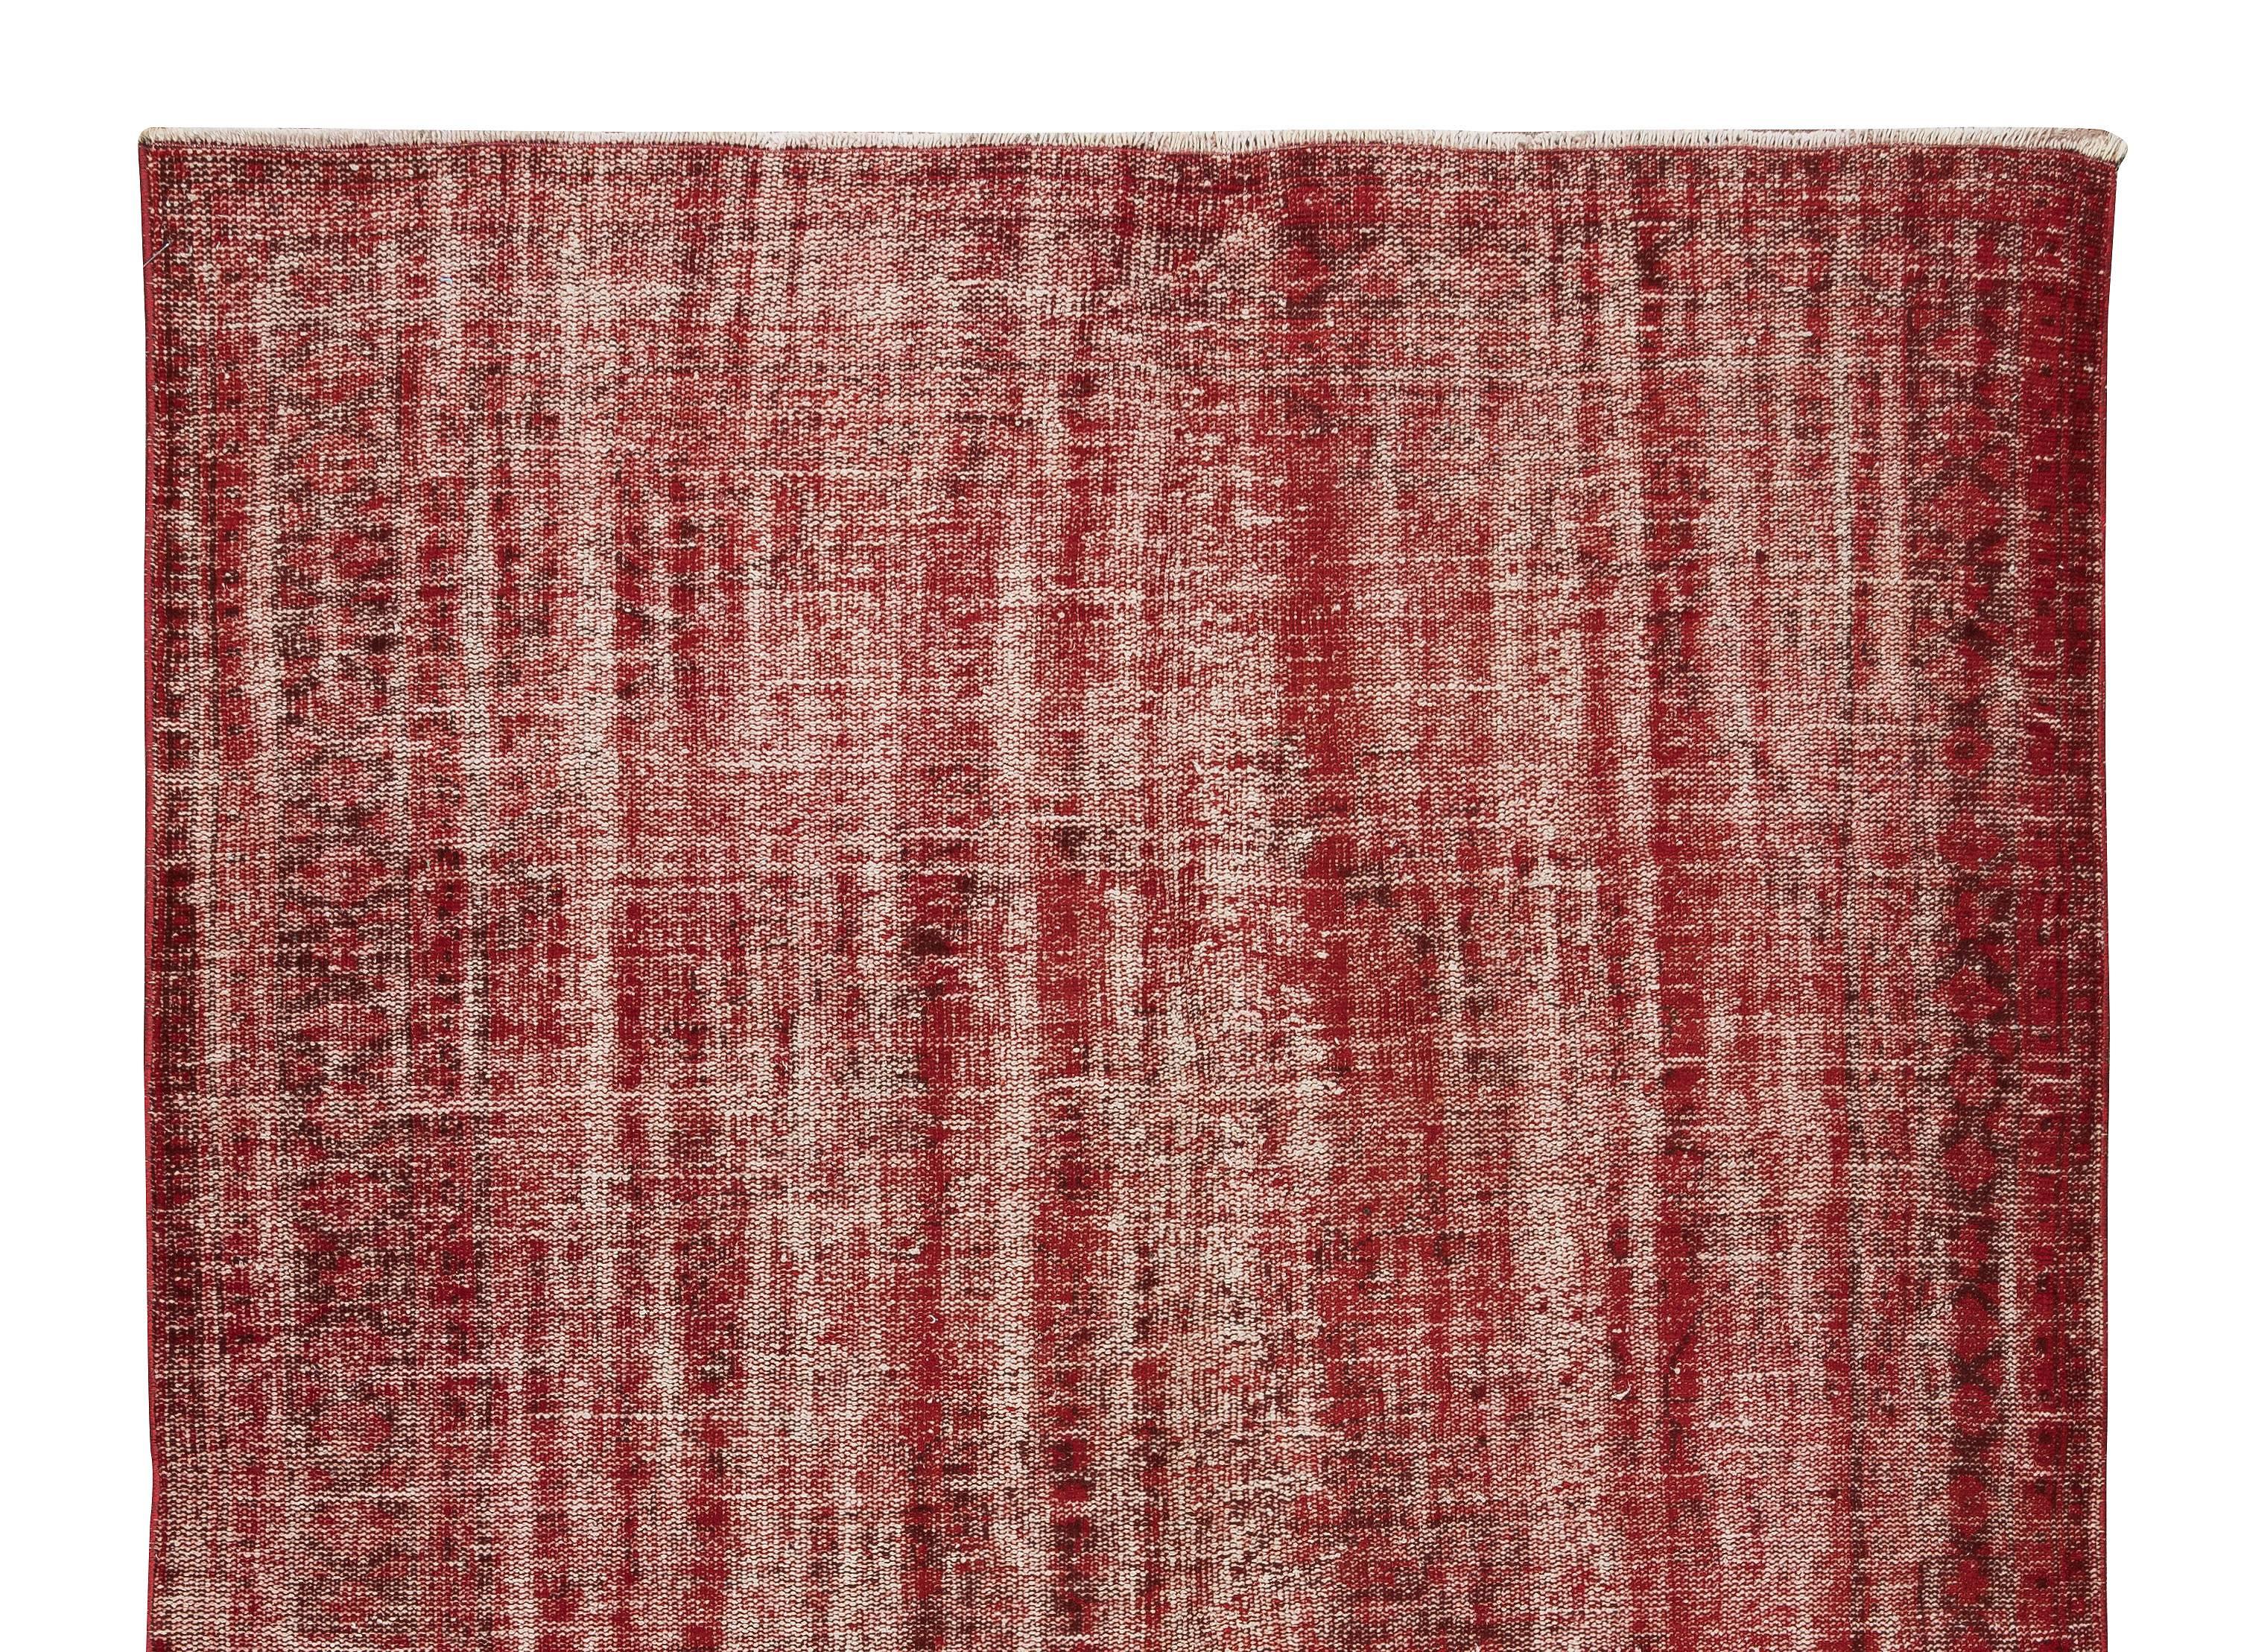 Hand-Knotted 5.8x8.7 Ft Distressed Handmade Turkish Vintage Area Rug, Red Wool Carpet For Sale